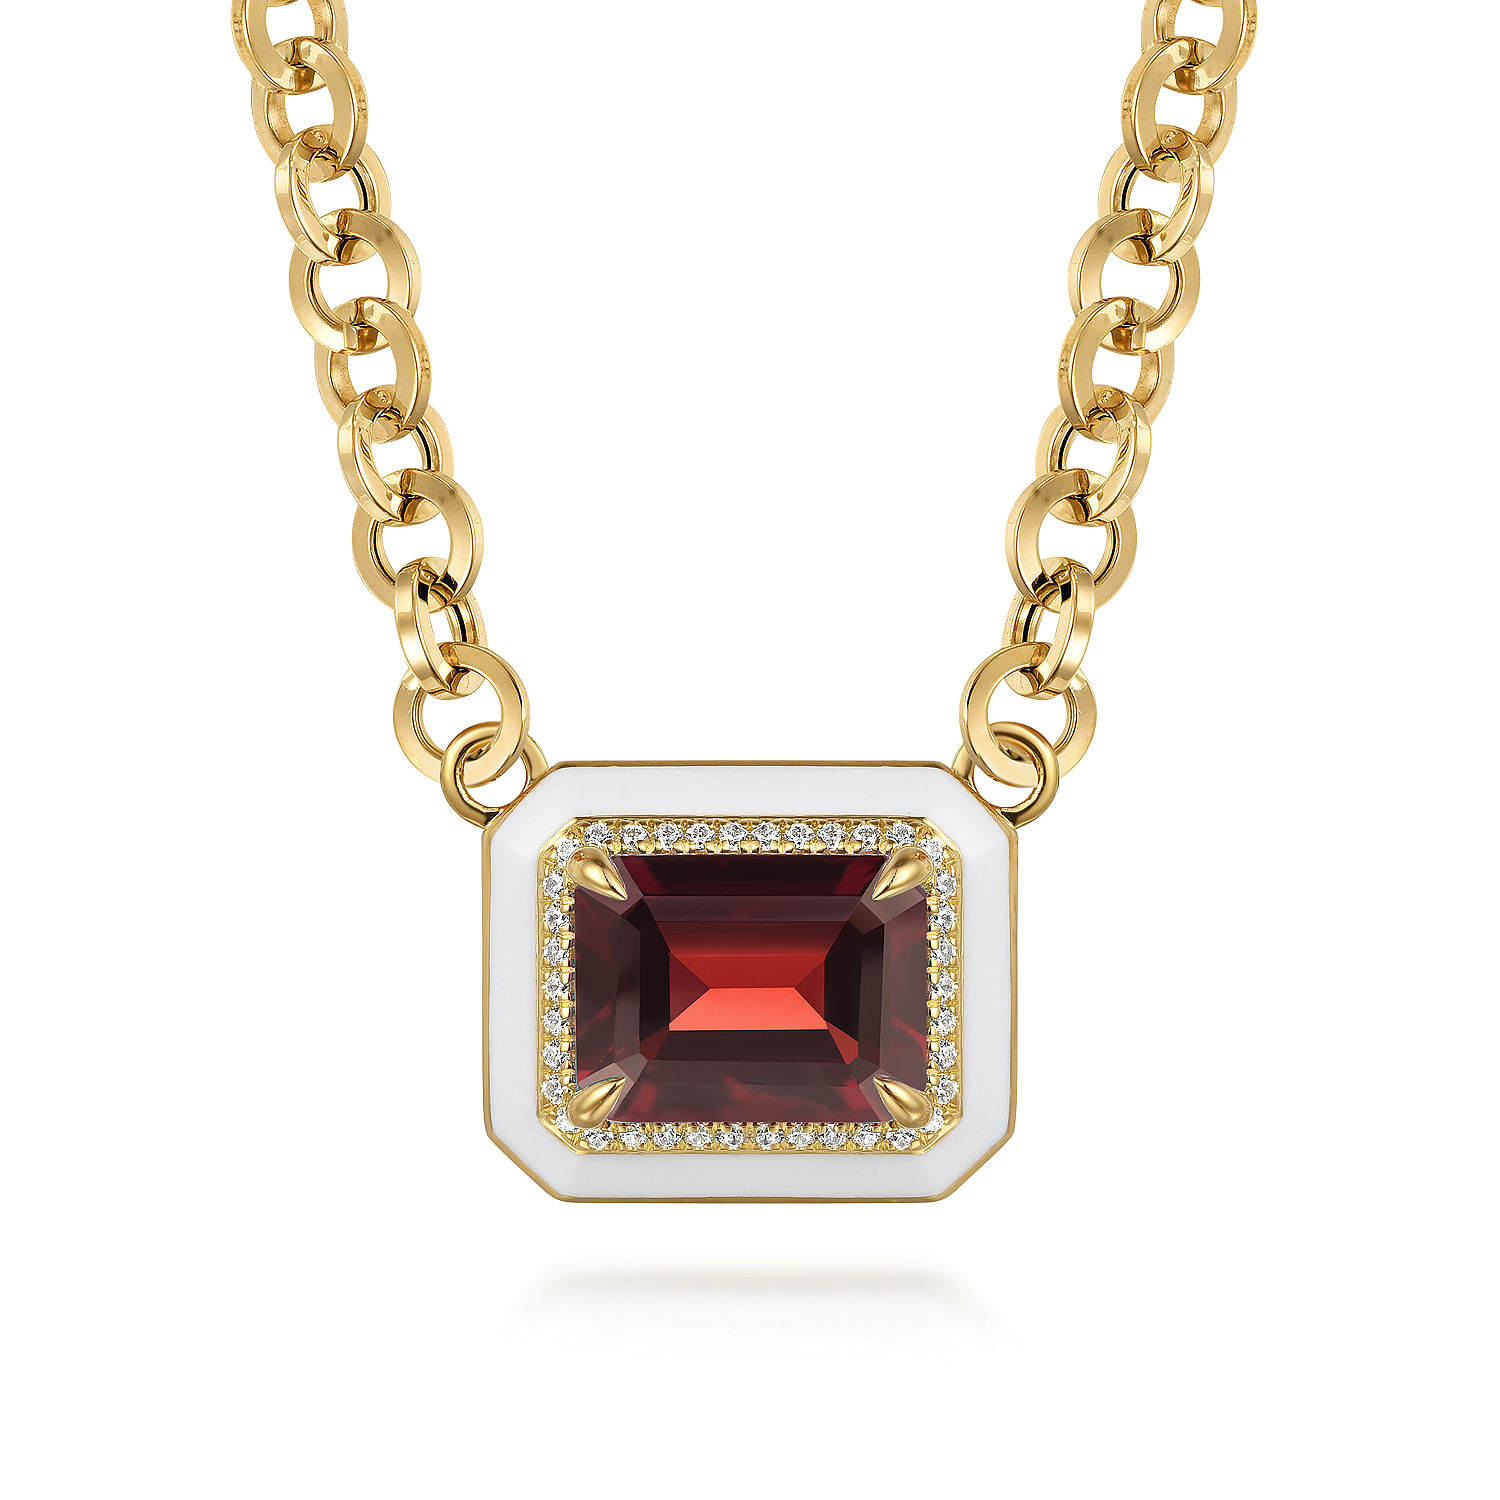 Gabriel - 14K Yellow Gold Diamond and Garnet Emerald Cut Necklace With Flower Pattern J-Back and White Enamel